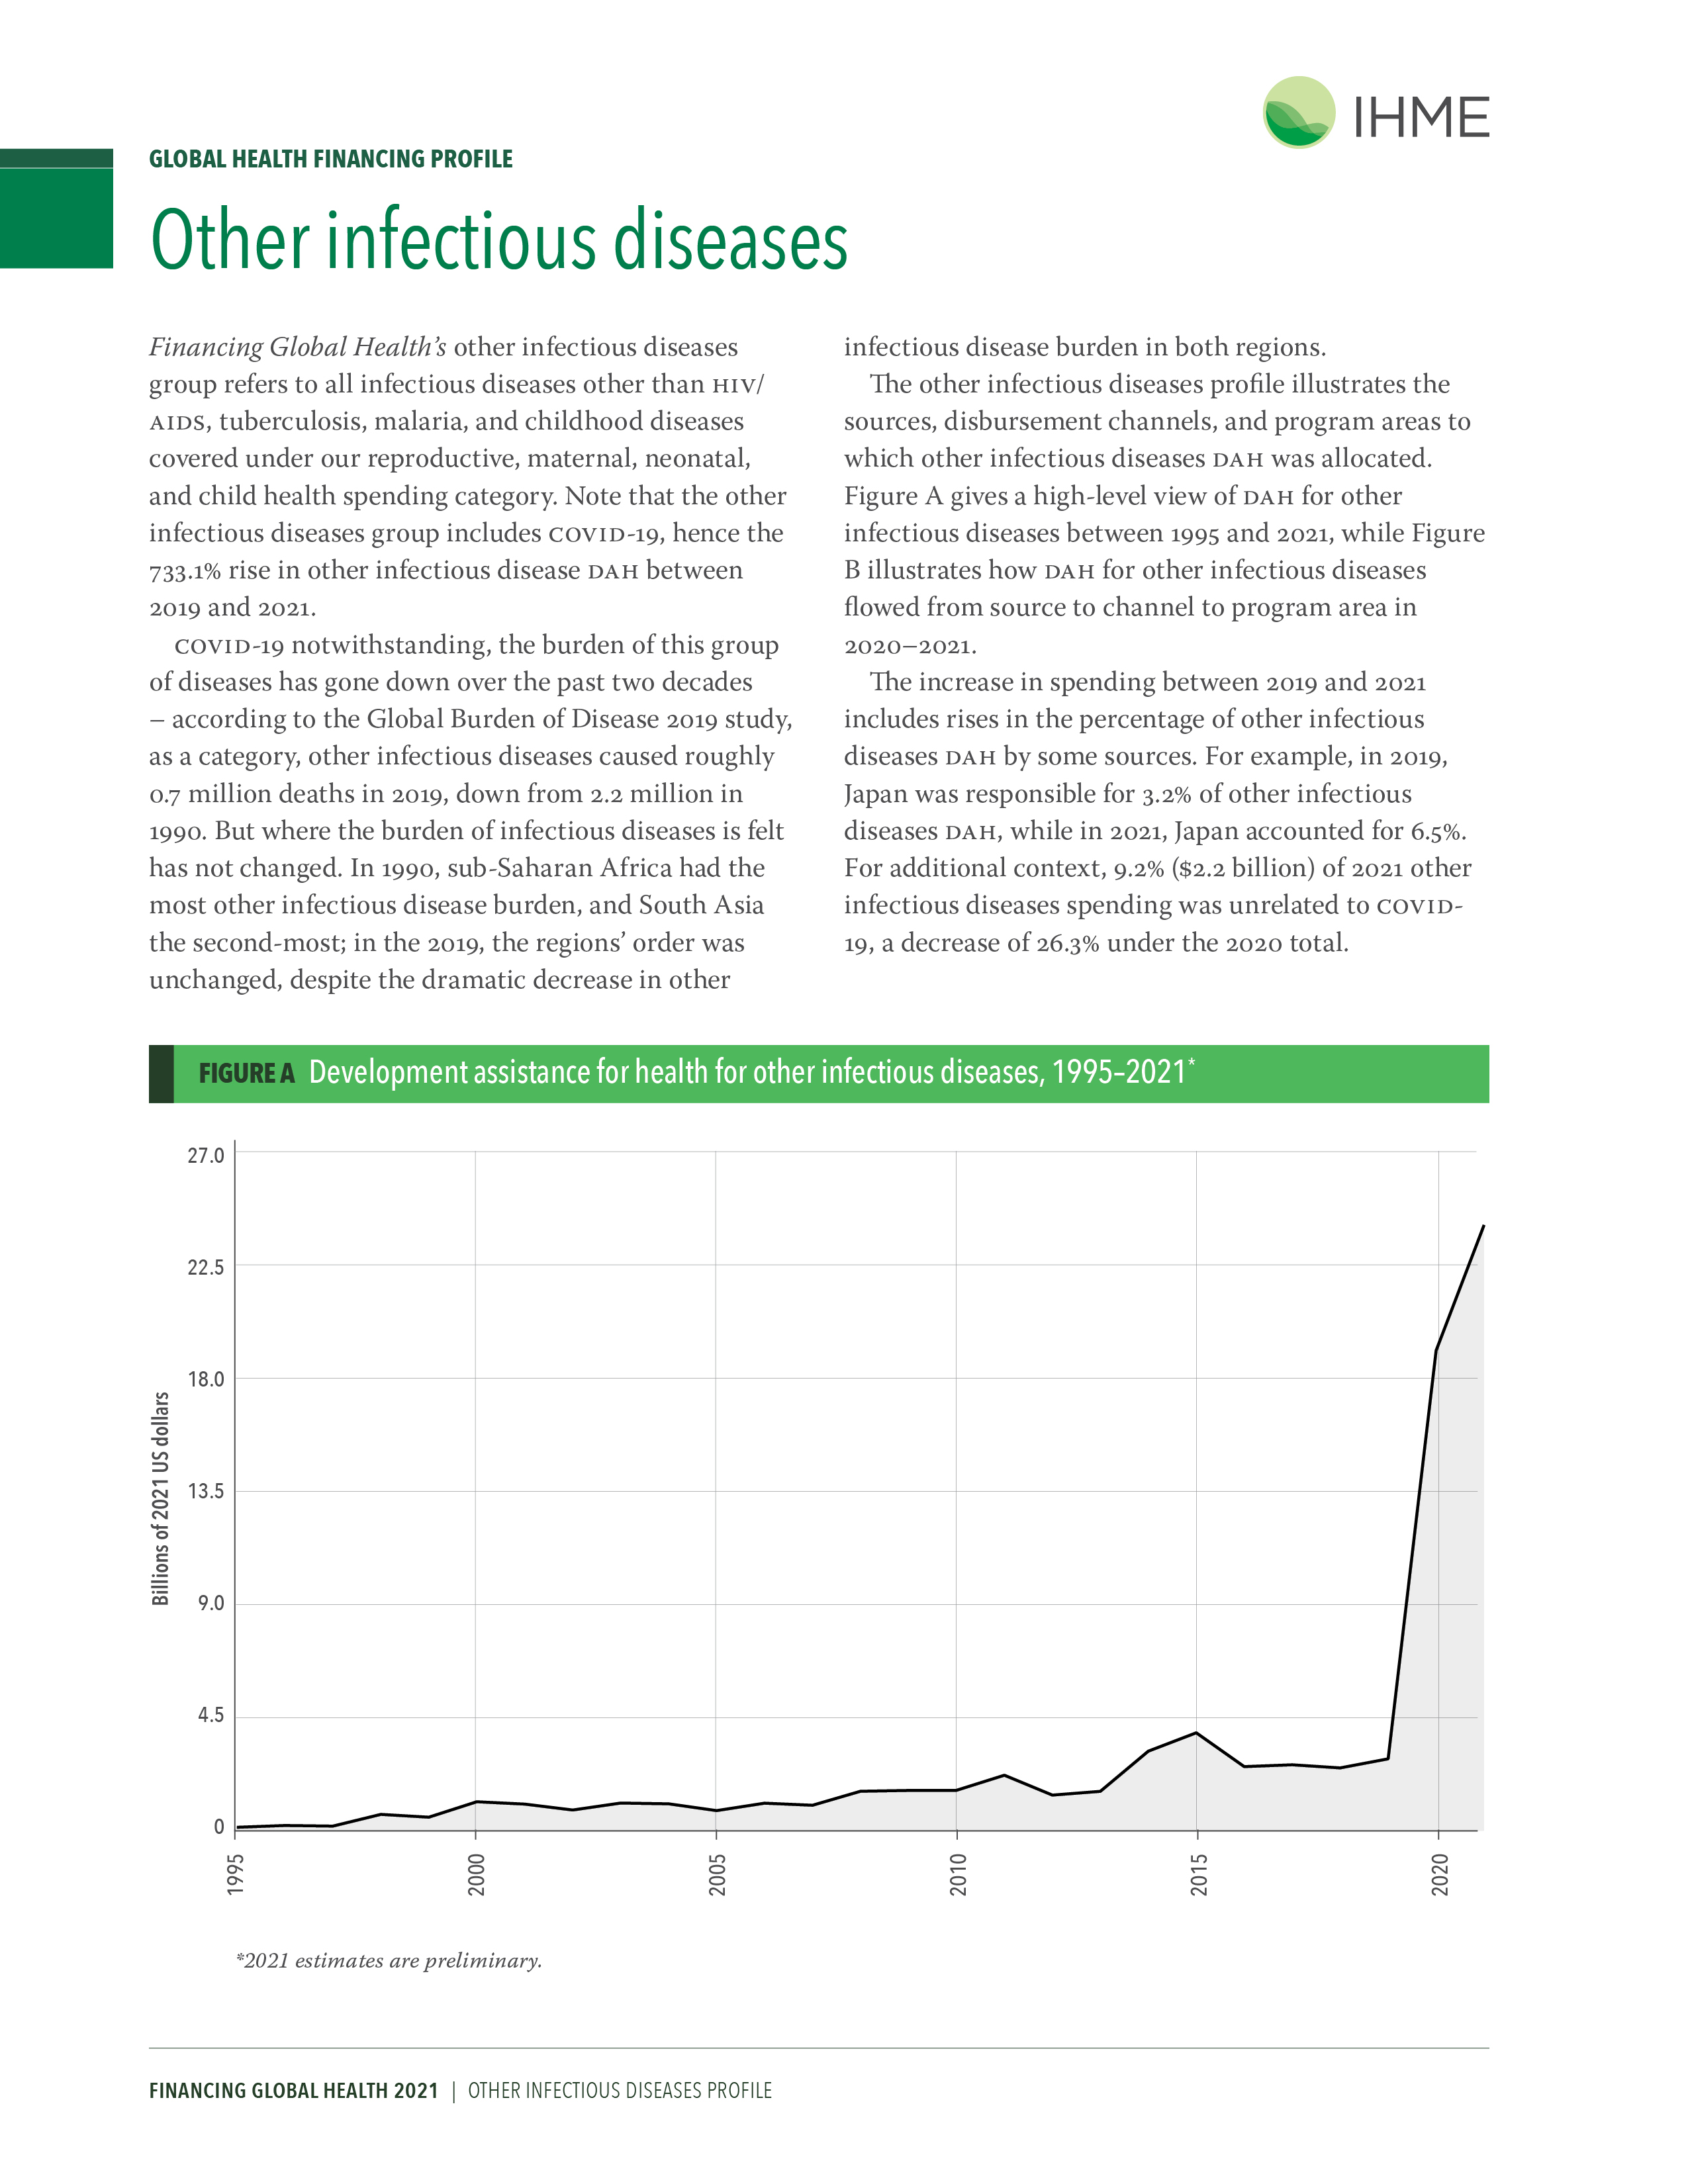 Disease spending profile for other infectious diseases: page 1 provides an overview of the expenses of other infectious diseases globally and development assistance for health. Download the profile for more details. 